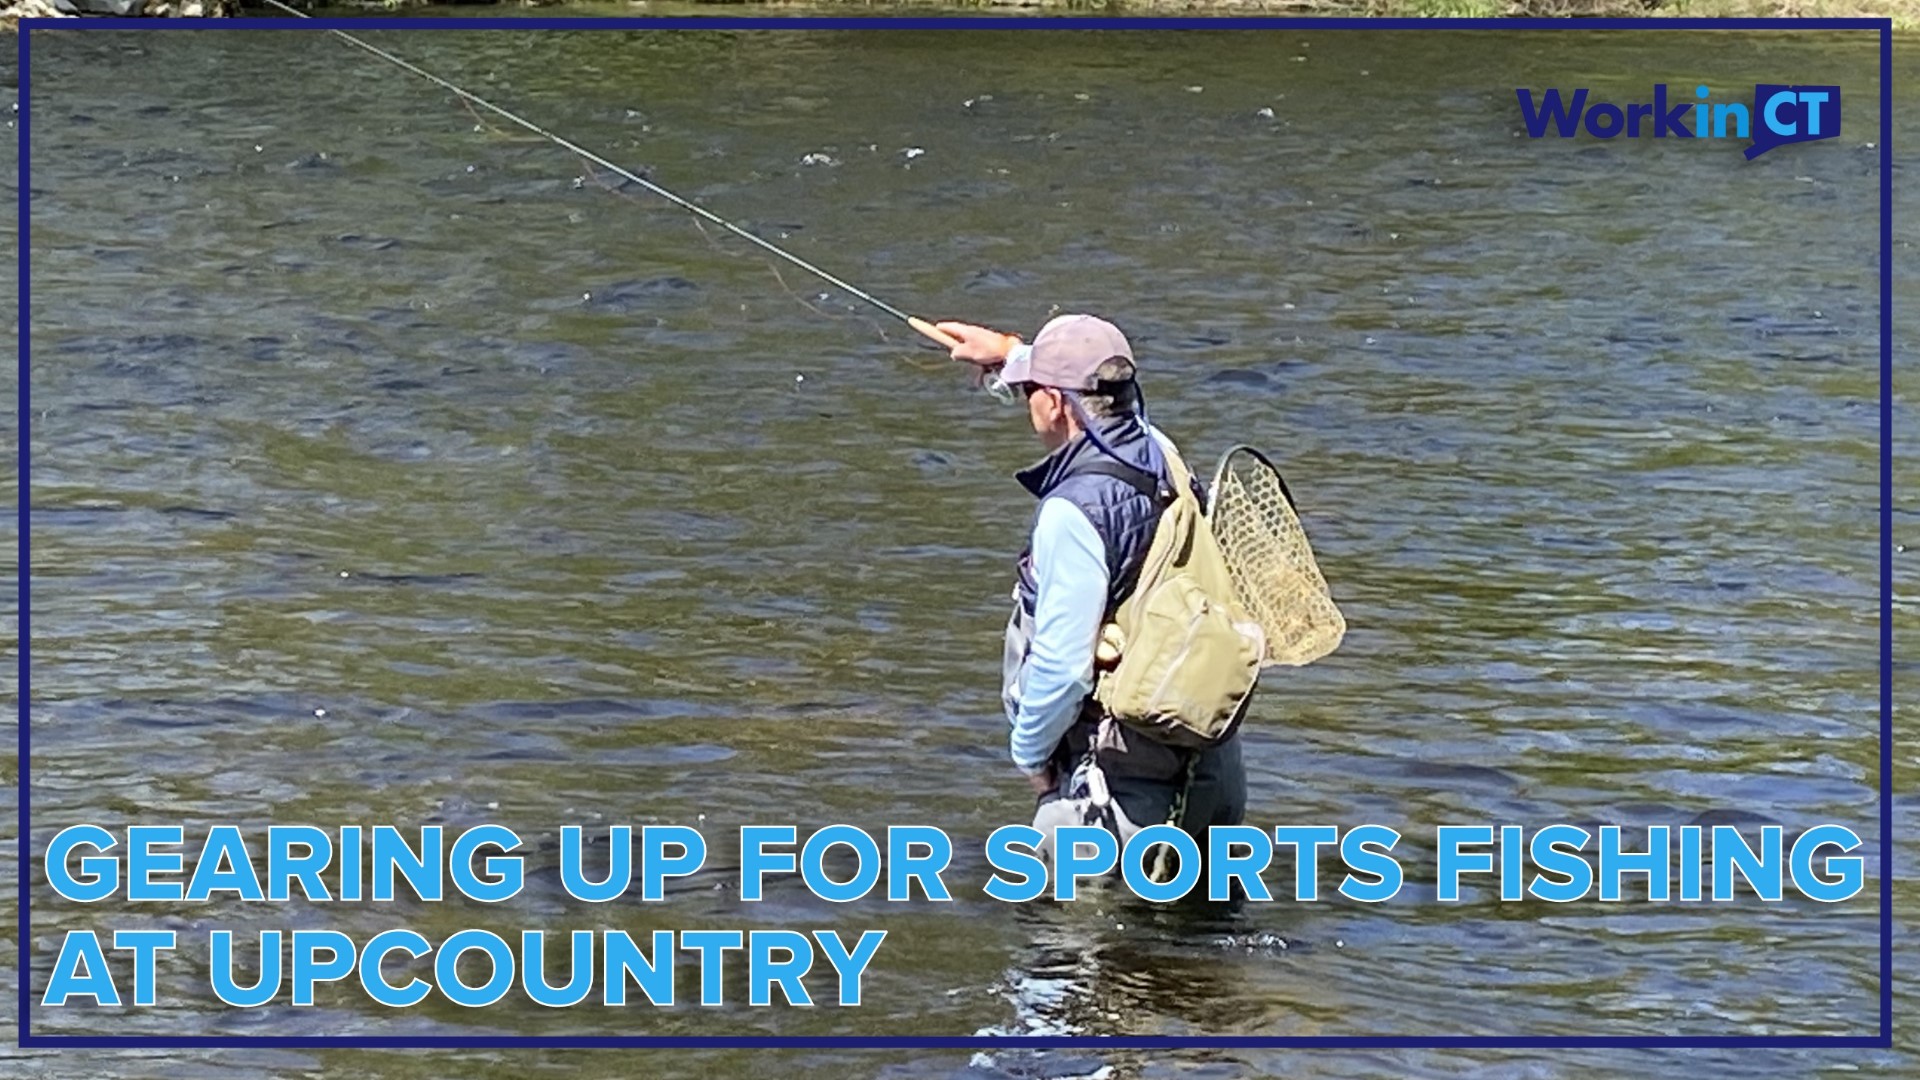 Upcountry is a fly-fishing specialty store that has been serving its growing customer base for more than three decades.